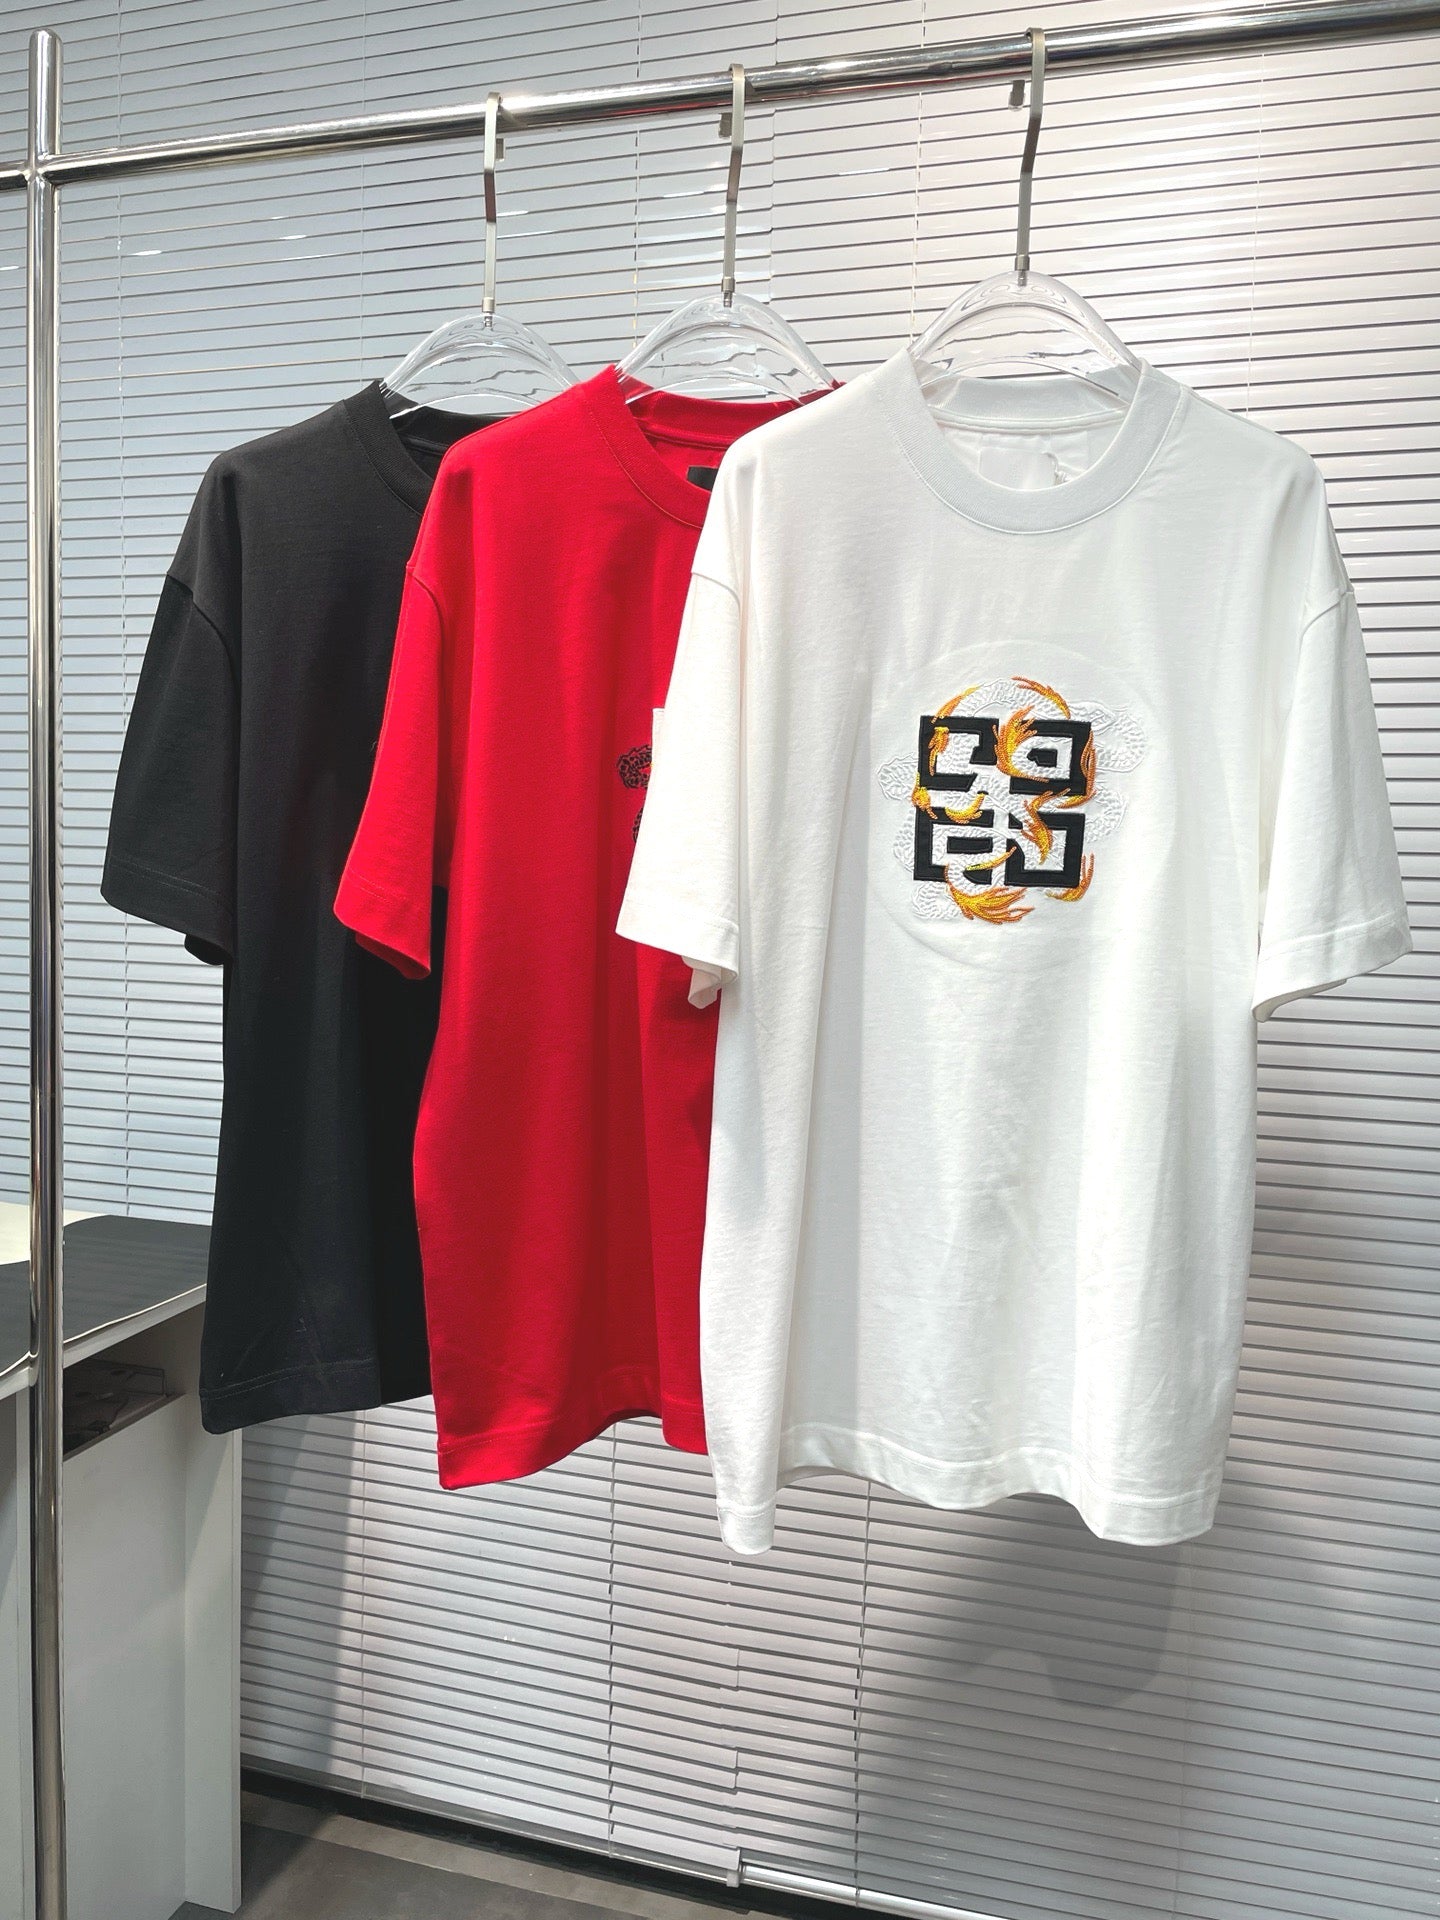 Black,Red and White T-shirts